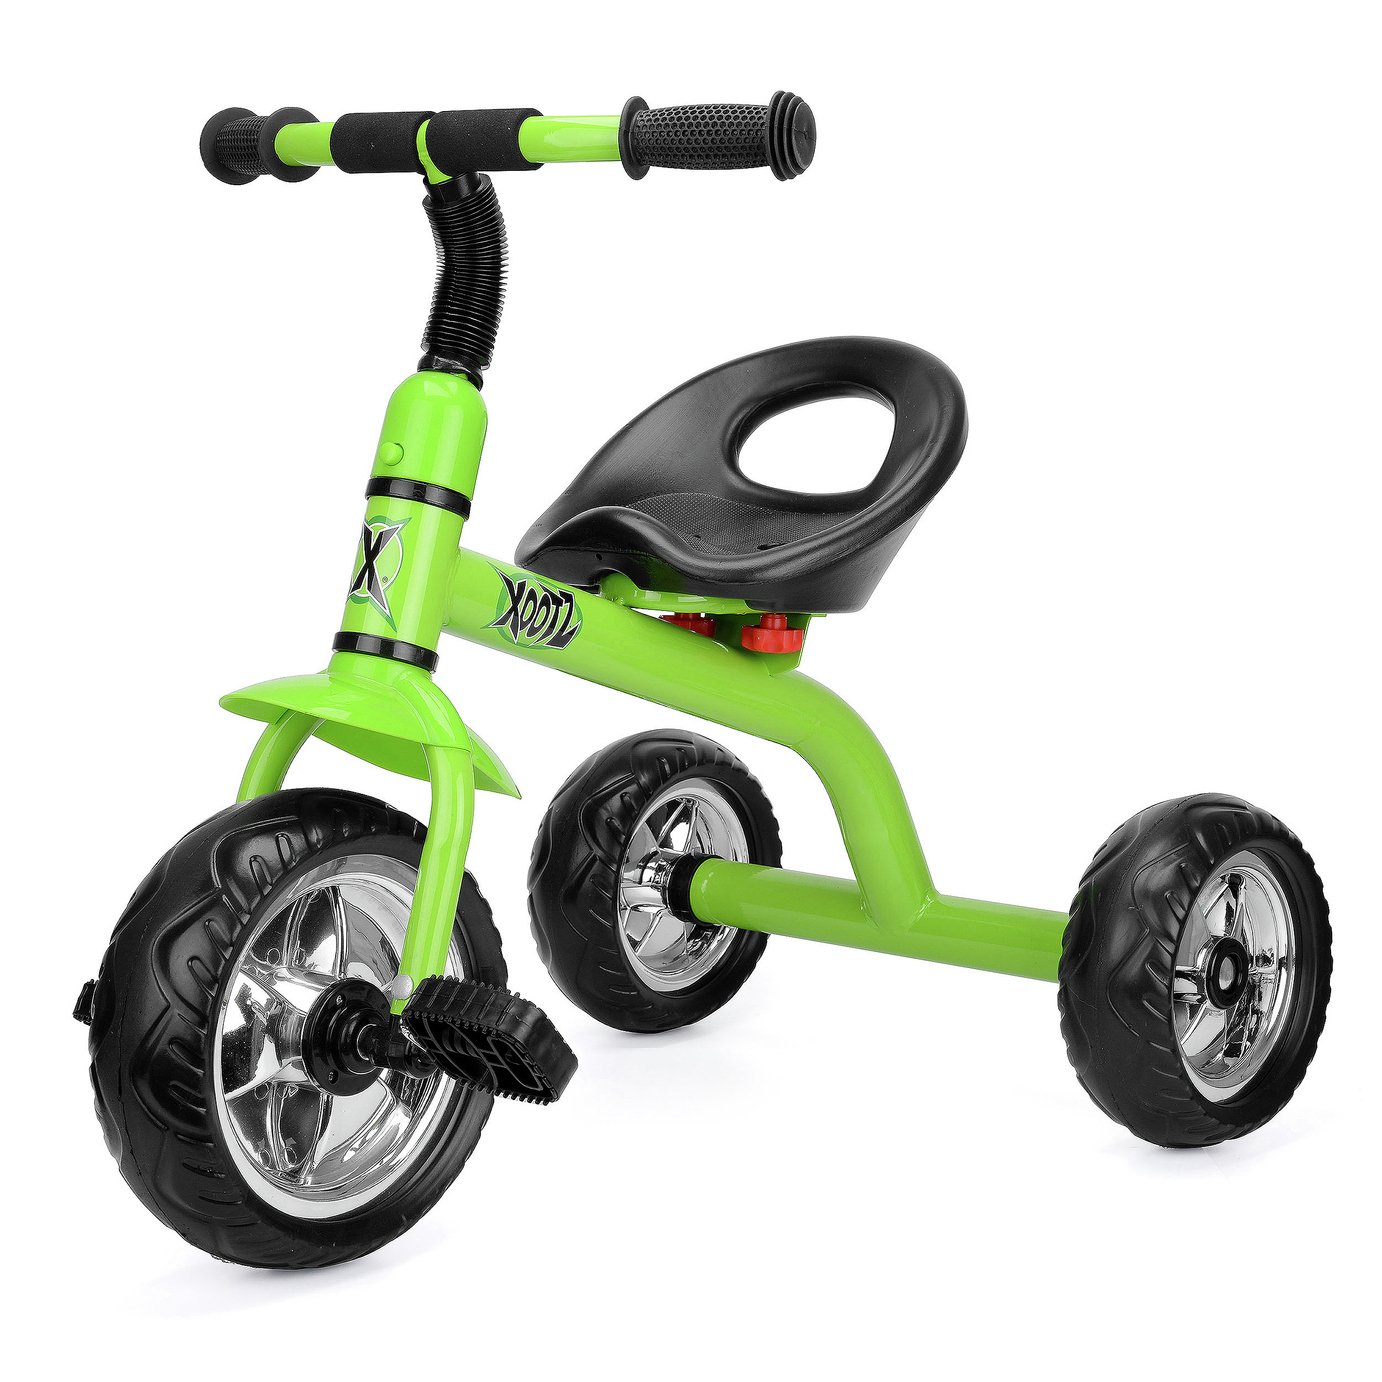 XOO Trike Green Ride On Review